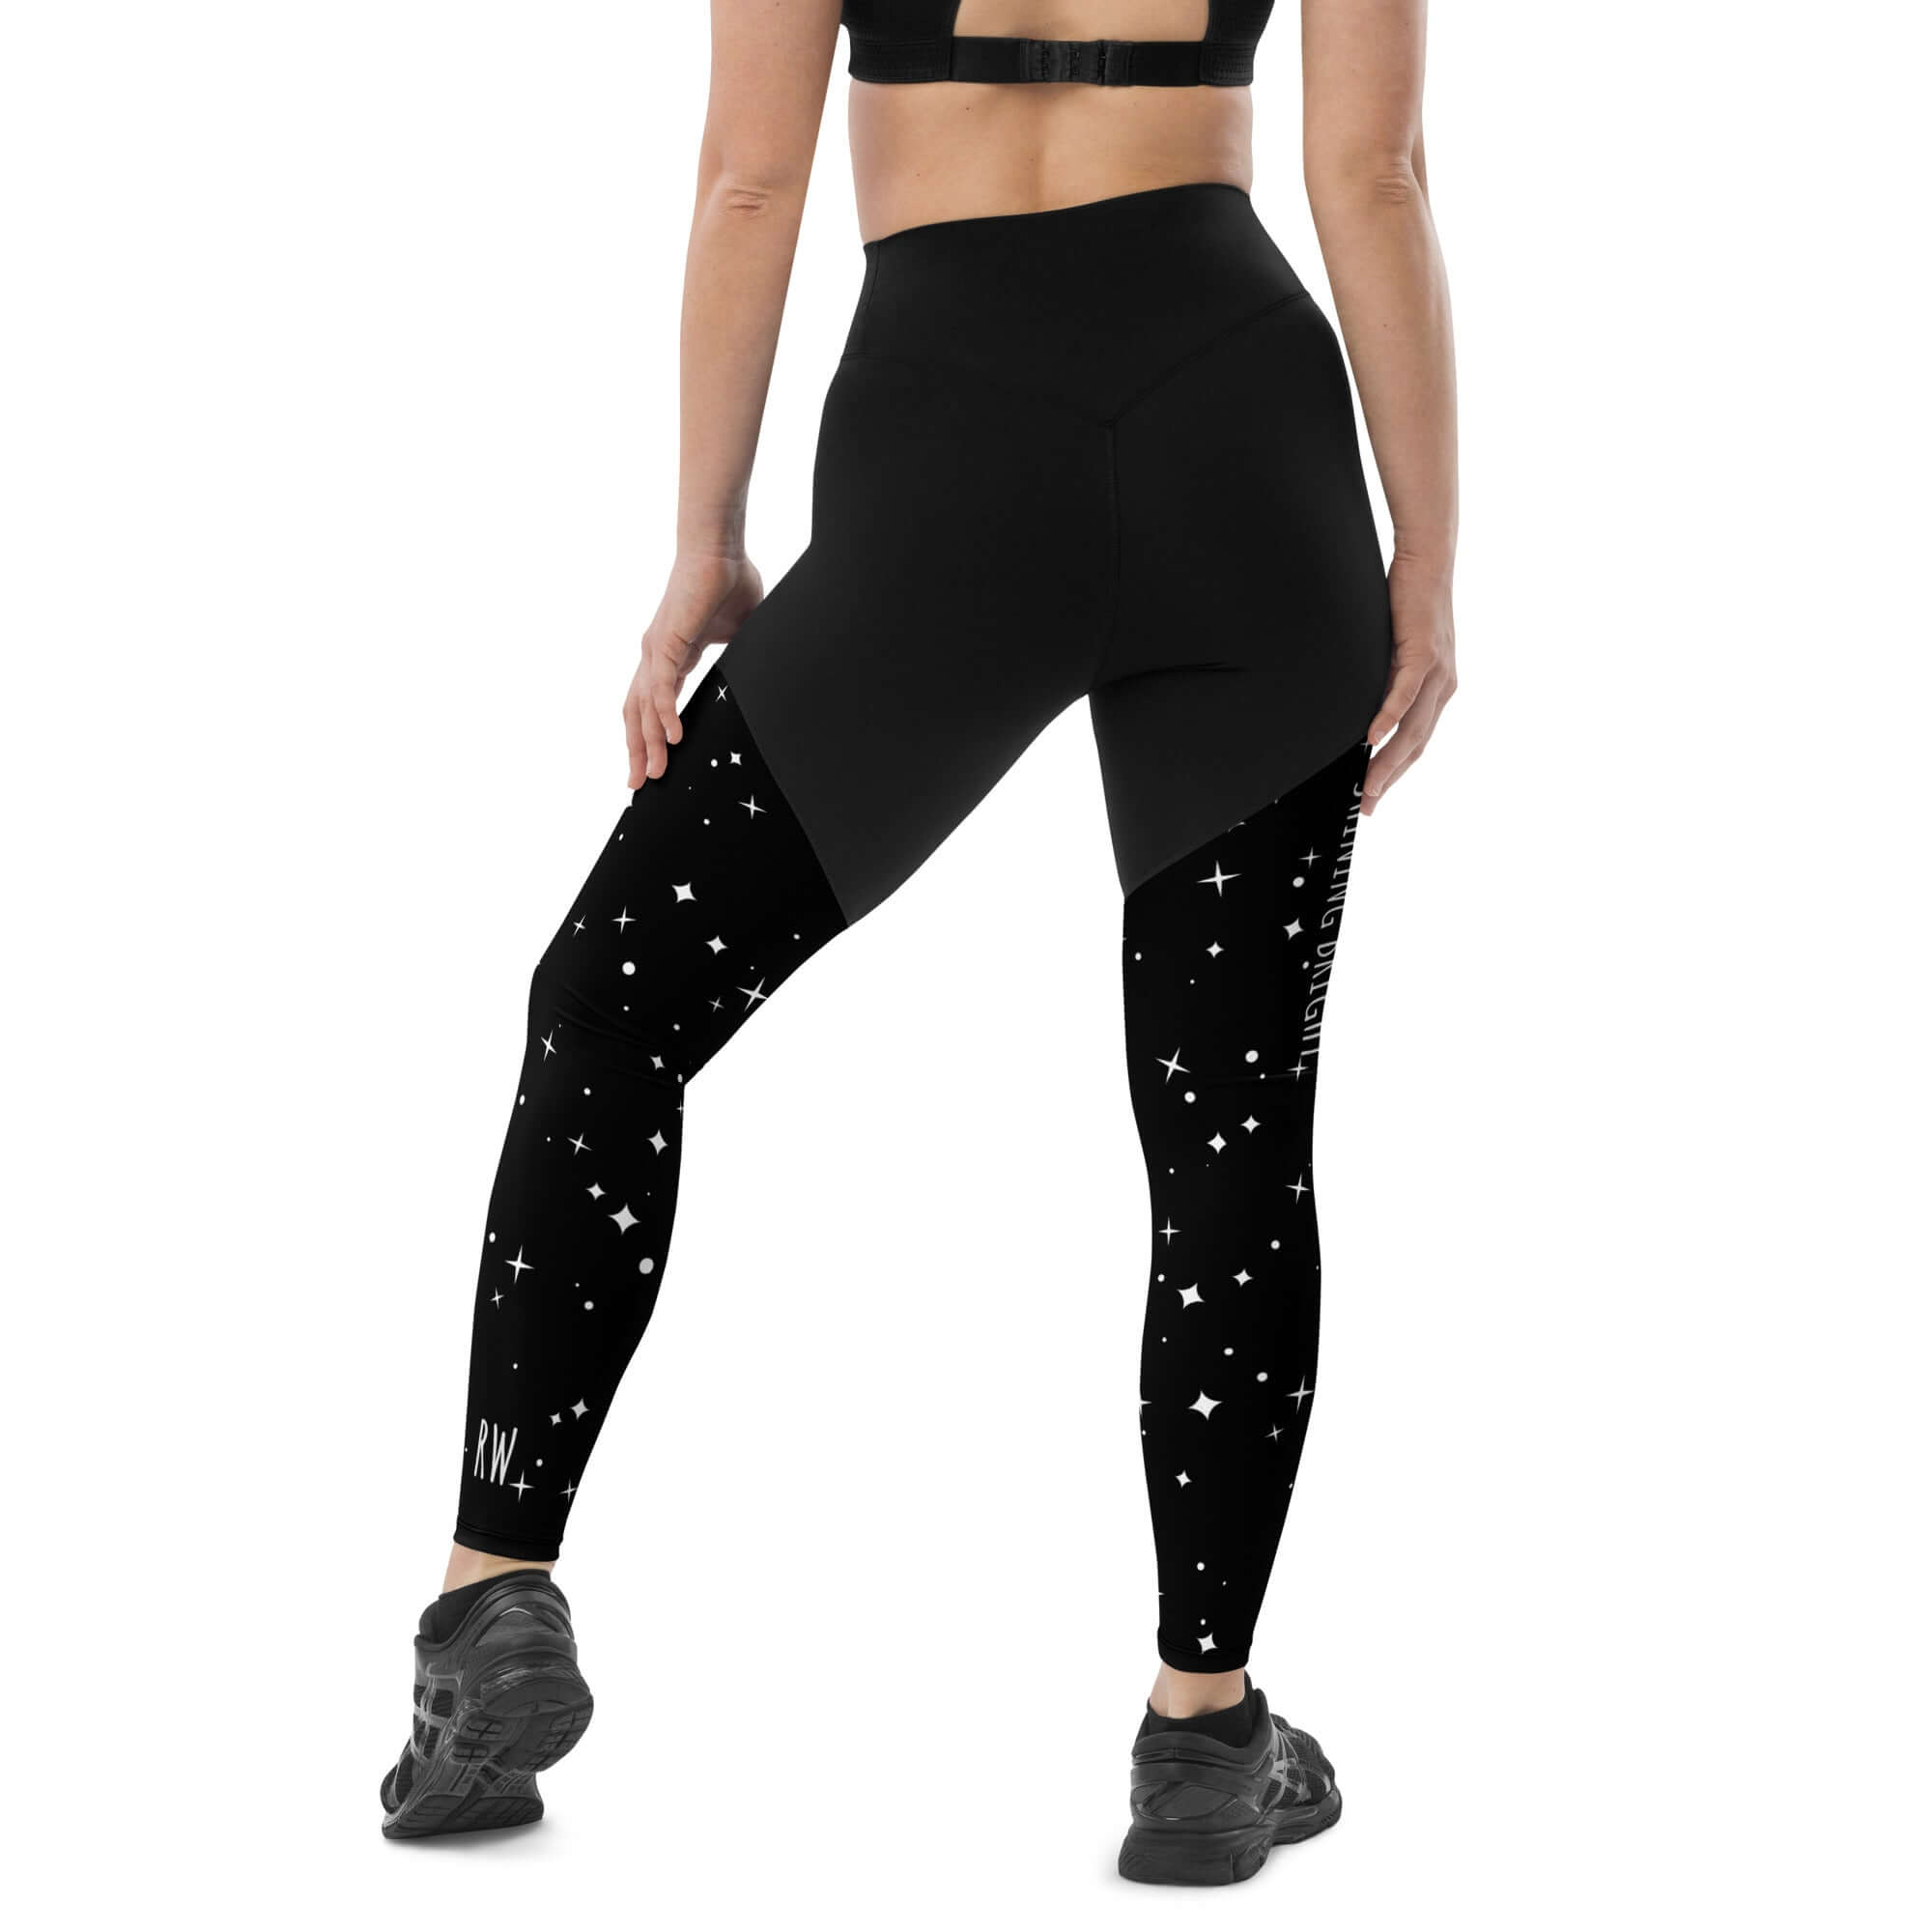 Black Sports Leggings with Handy Pockets - Revive Wear     Elevate your workout with our Sports Leggings with Pockets. These leggings are designed with handy pockets to store your essentials, made from a soft and stretchy fabric for maximum comfort!